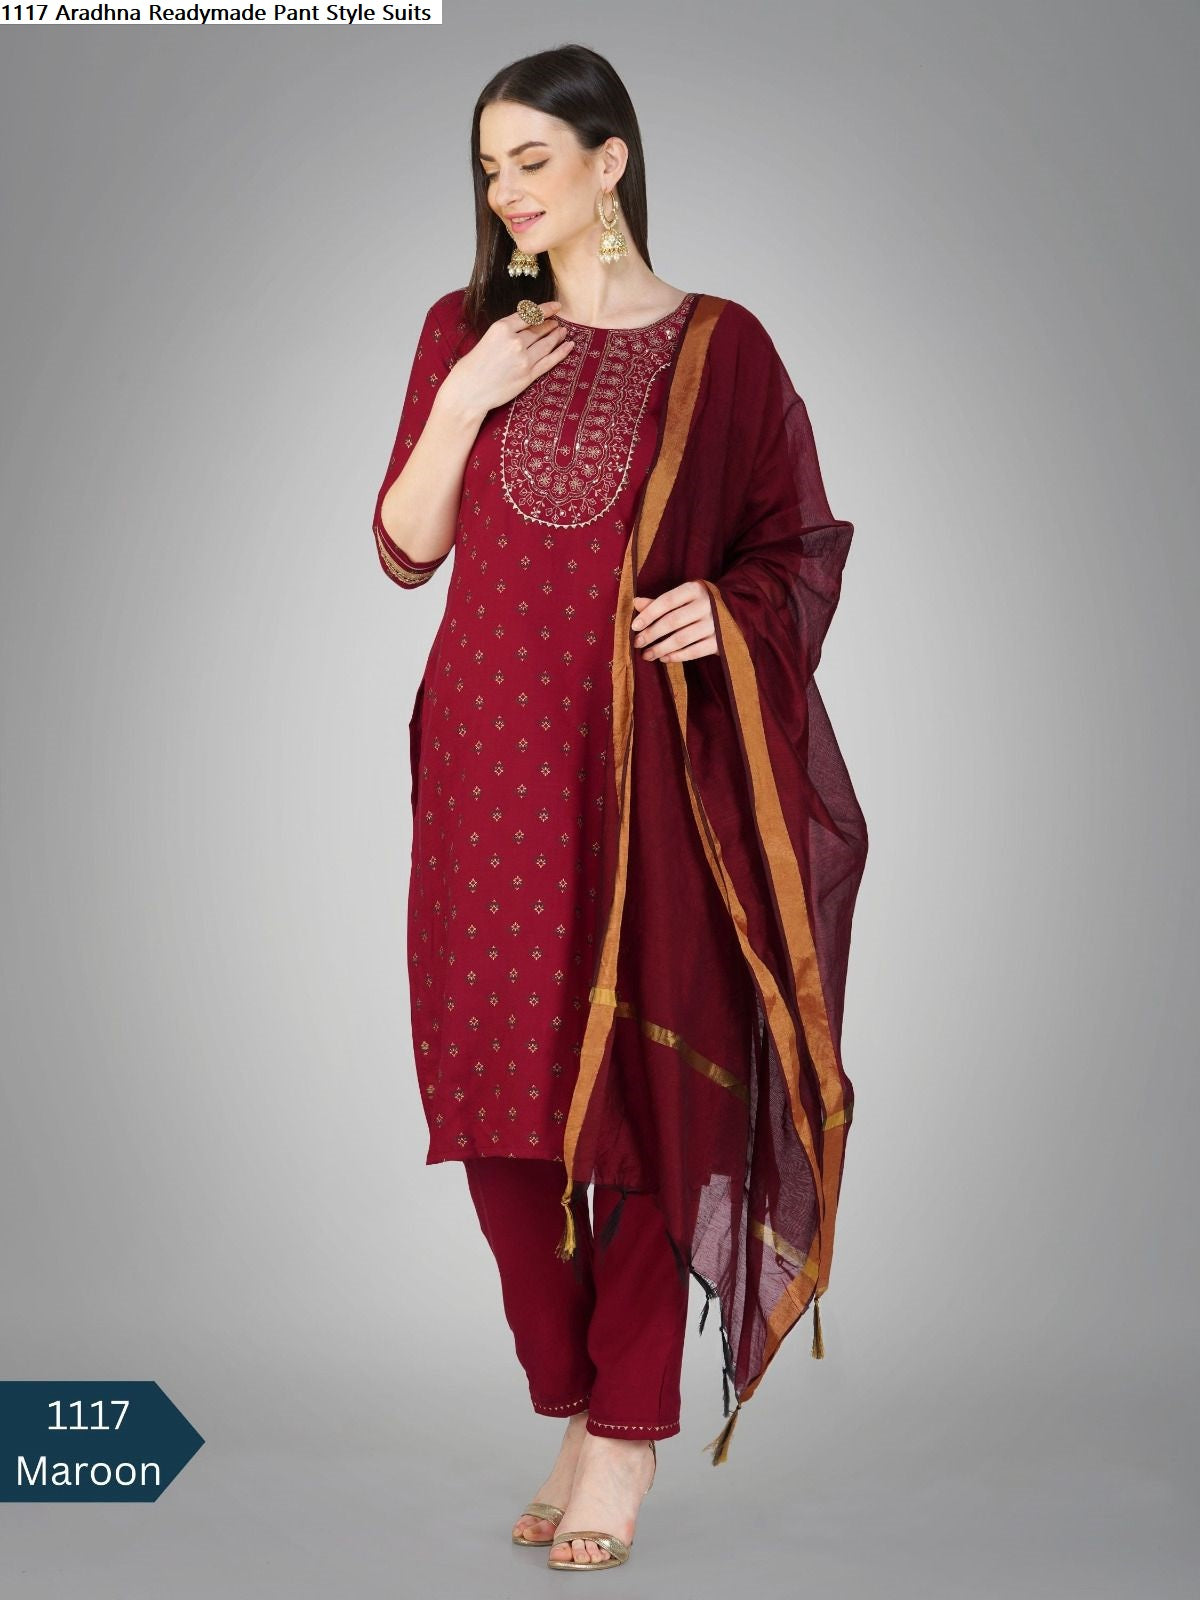 1117 Aradhna Cotton Readymade Pant Style Suits